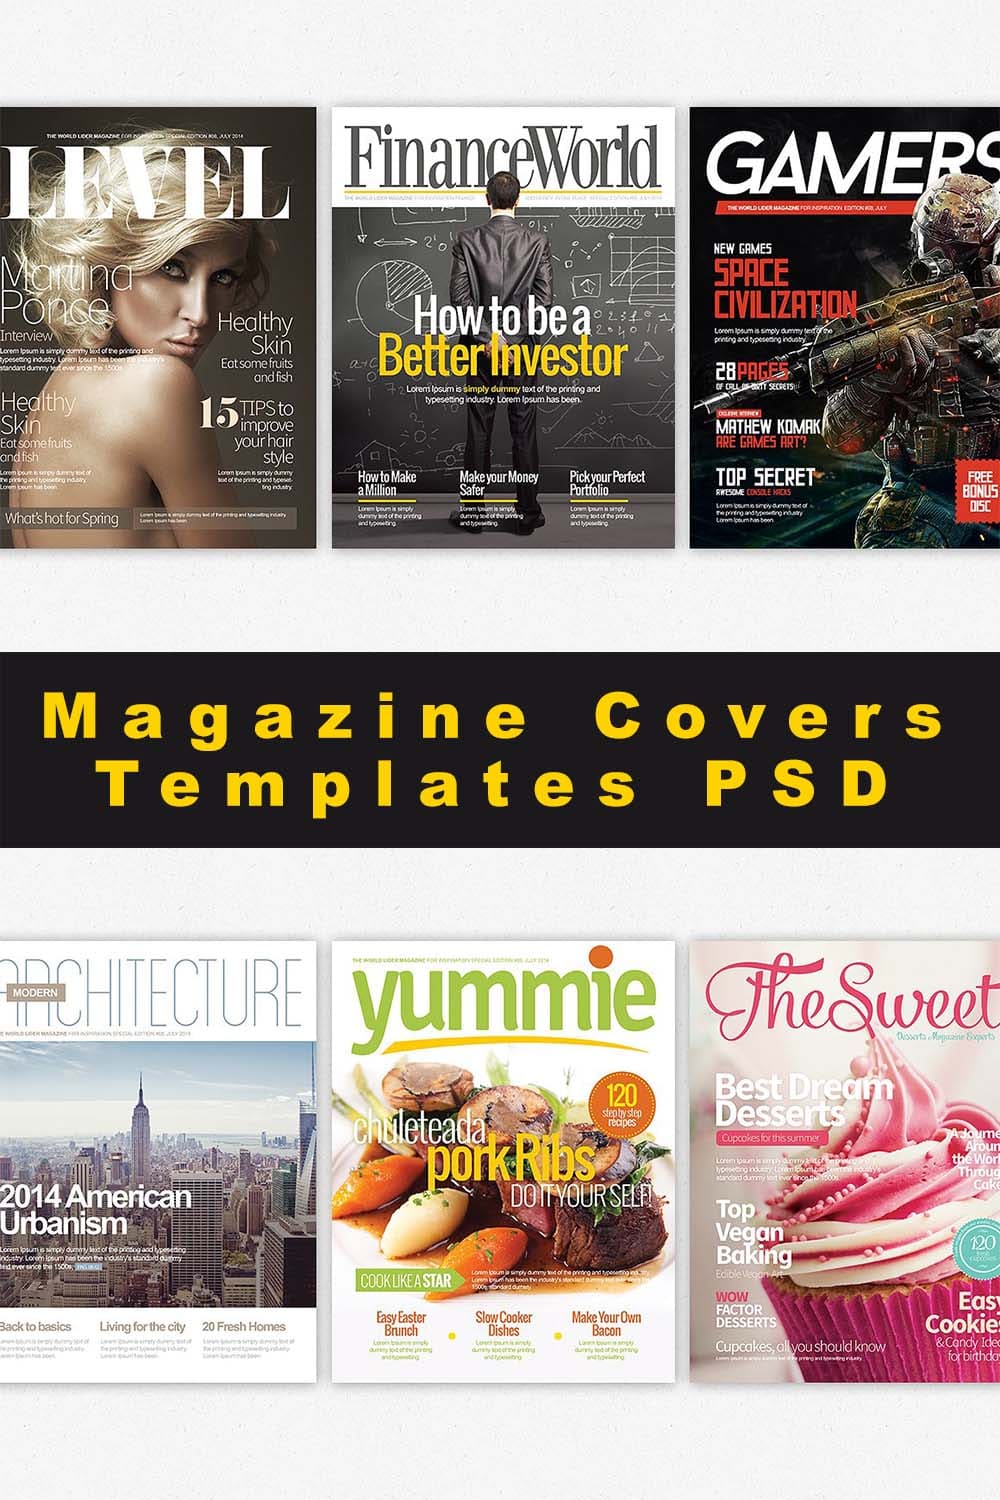 magazine covers templates psd pinterest images.